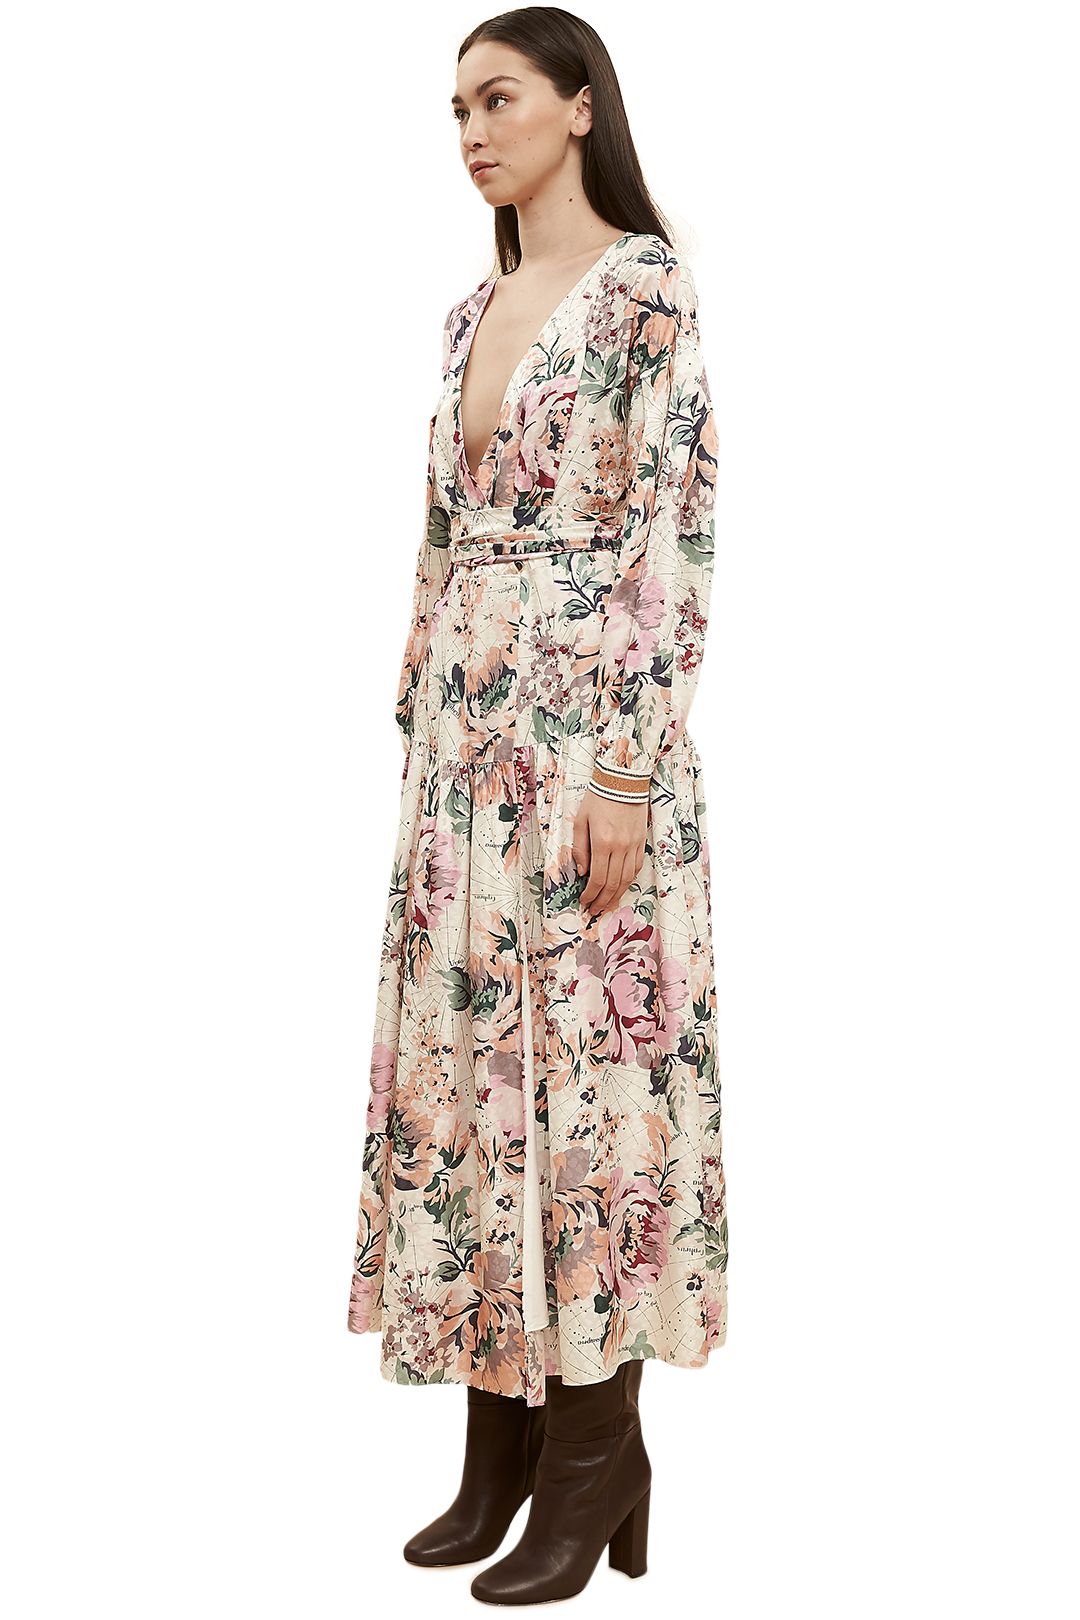 Ginger-And-Smart-Floral-Charts-Wrap-Dress-Floral-White-Side